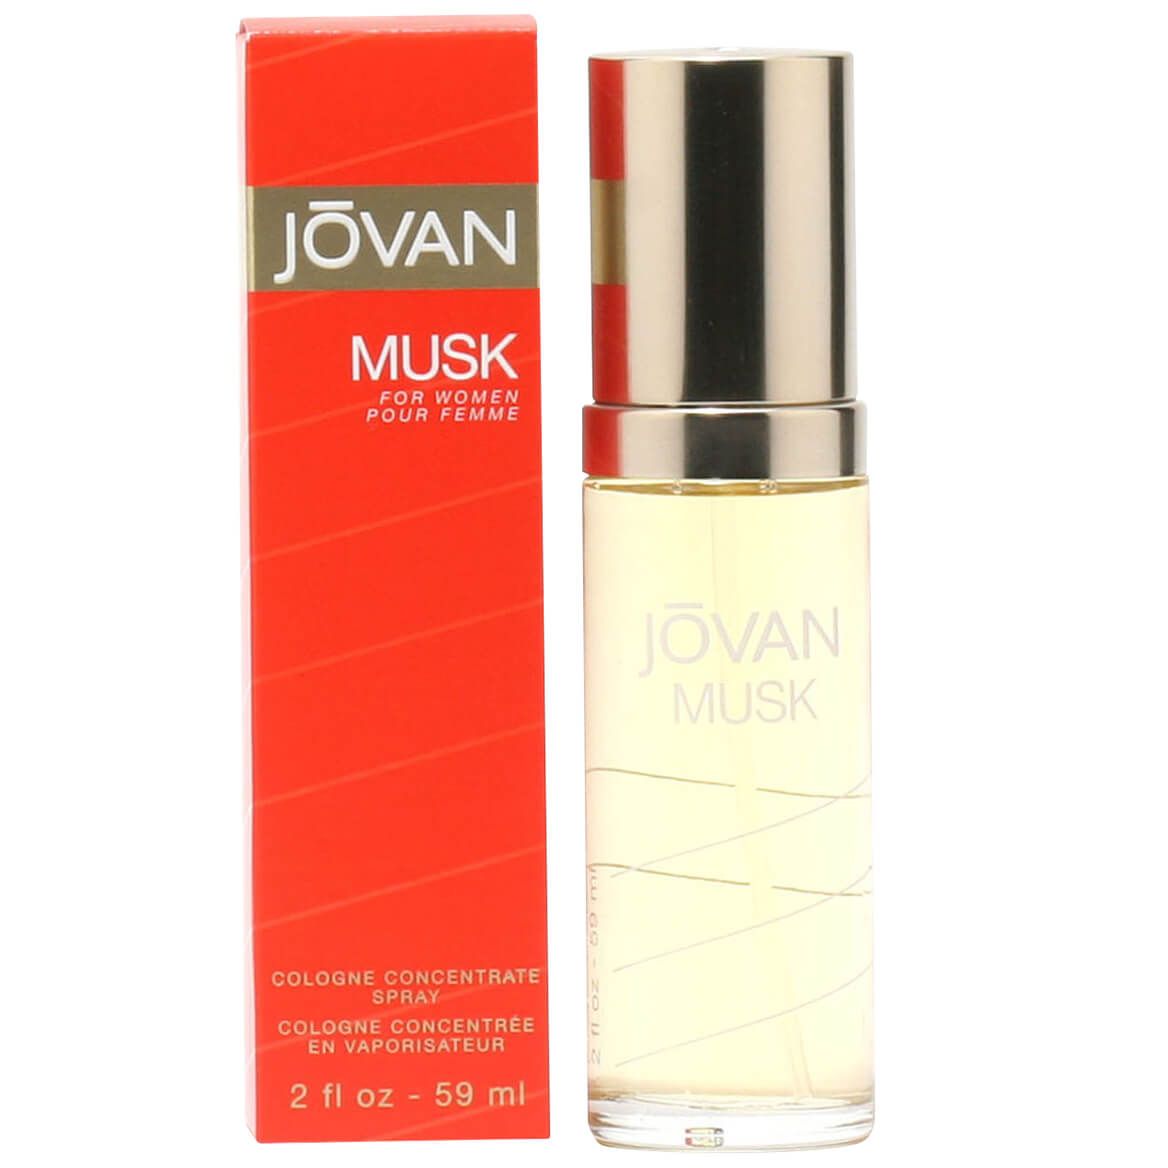 Jovan Musk for Women Cologne Concentrate Spray, 2 fl. oz. + '-' + 377270